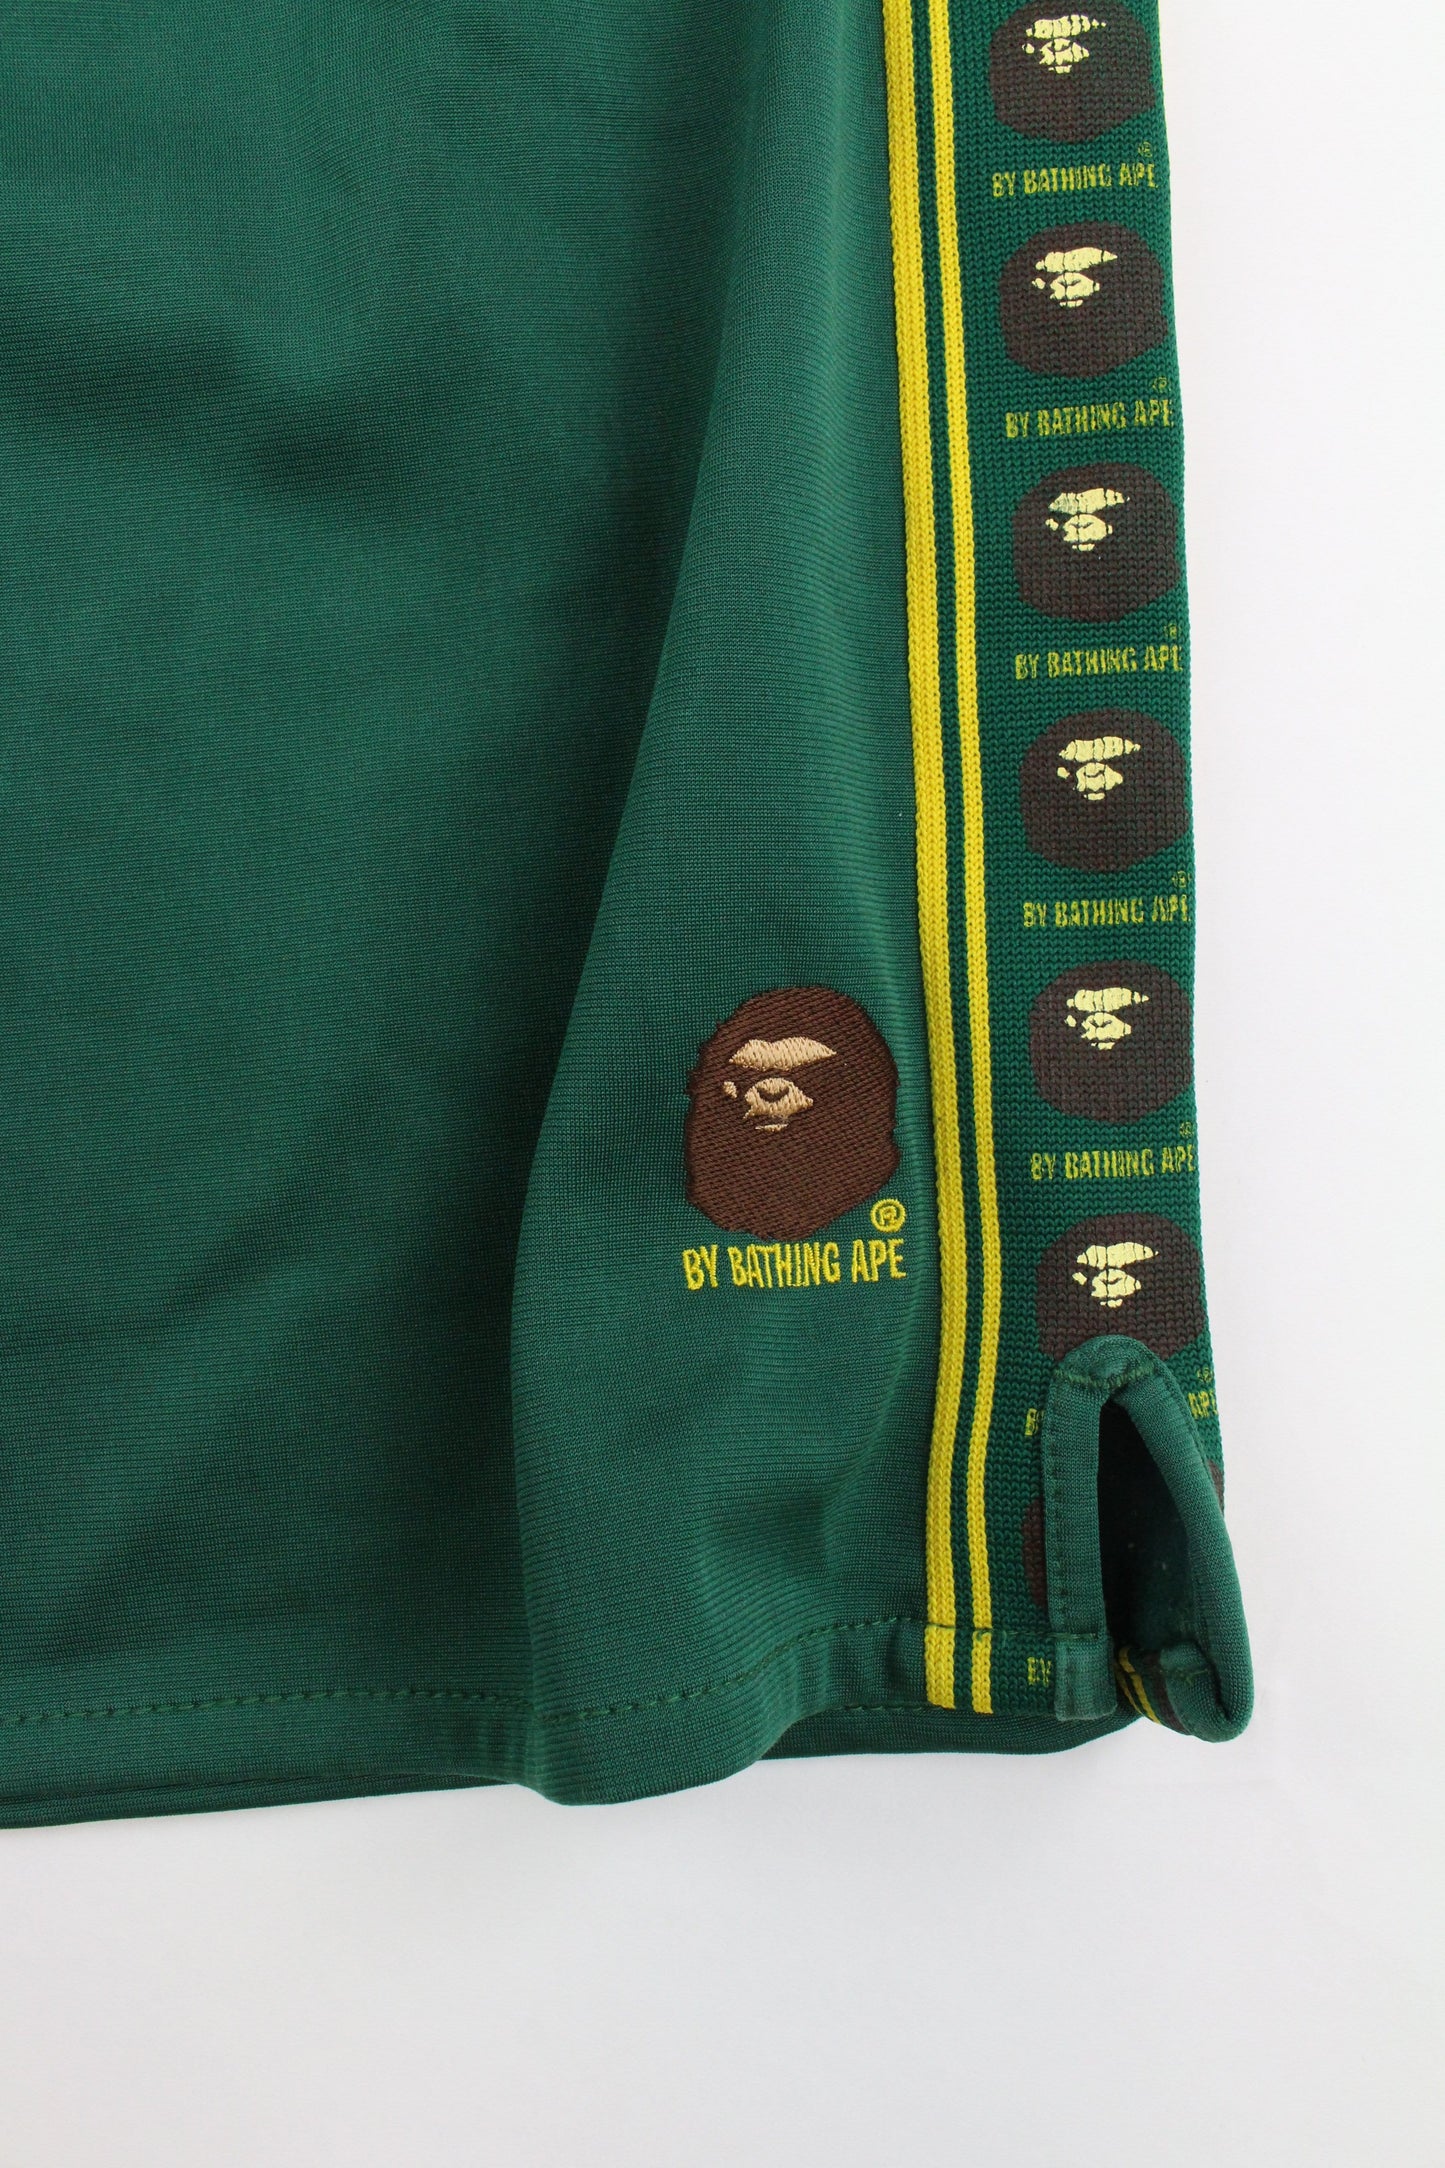 Bape Angry Face Stripe Shorts Green - SaruGeneral